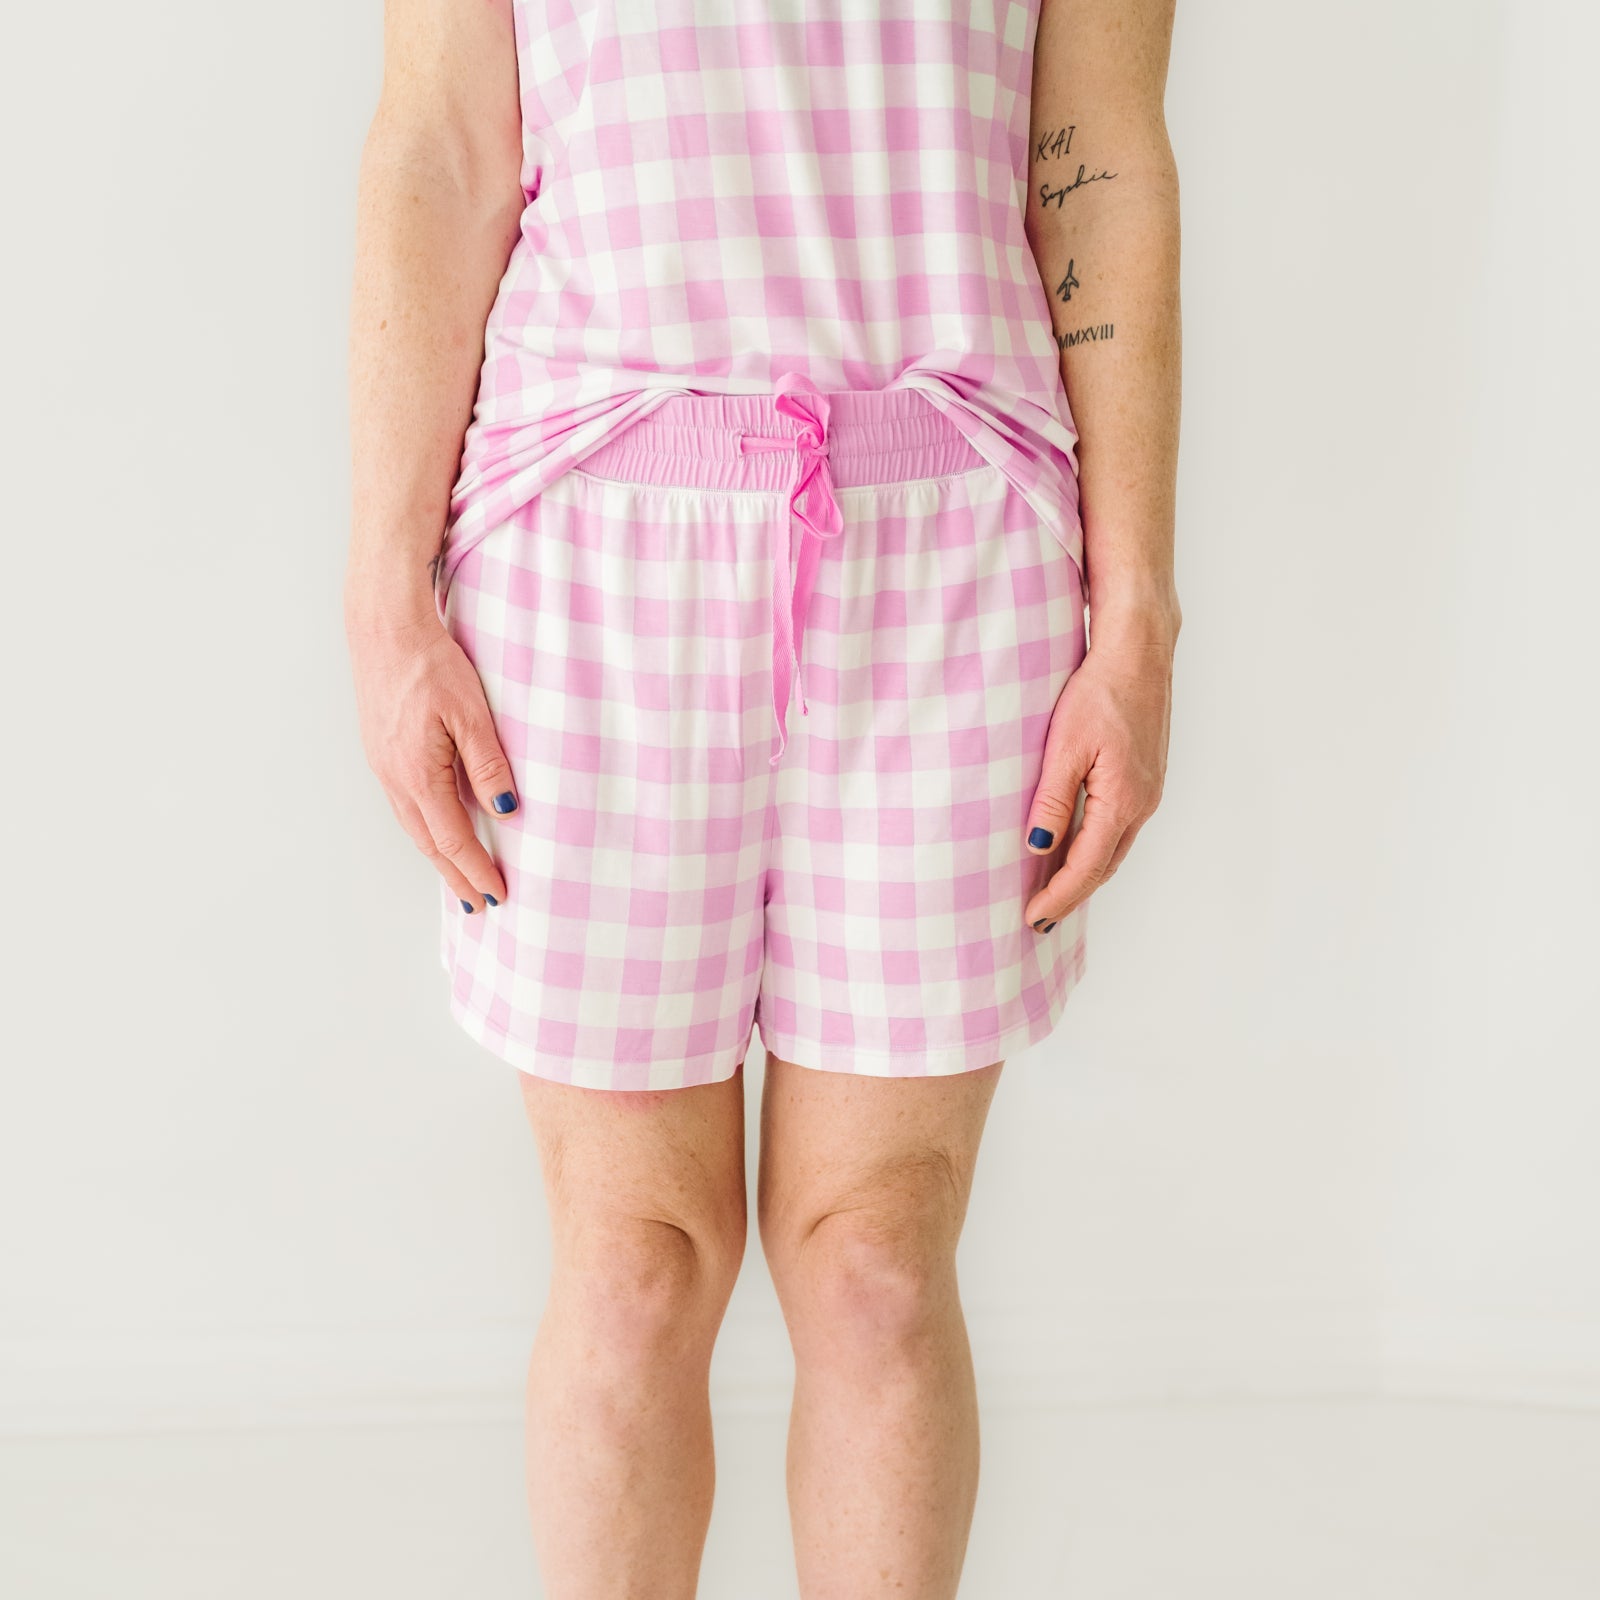 Close up image of a woman wearing Pink Gingham pajama shorts showing off the drawstring